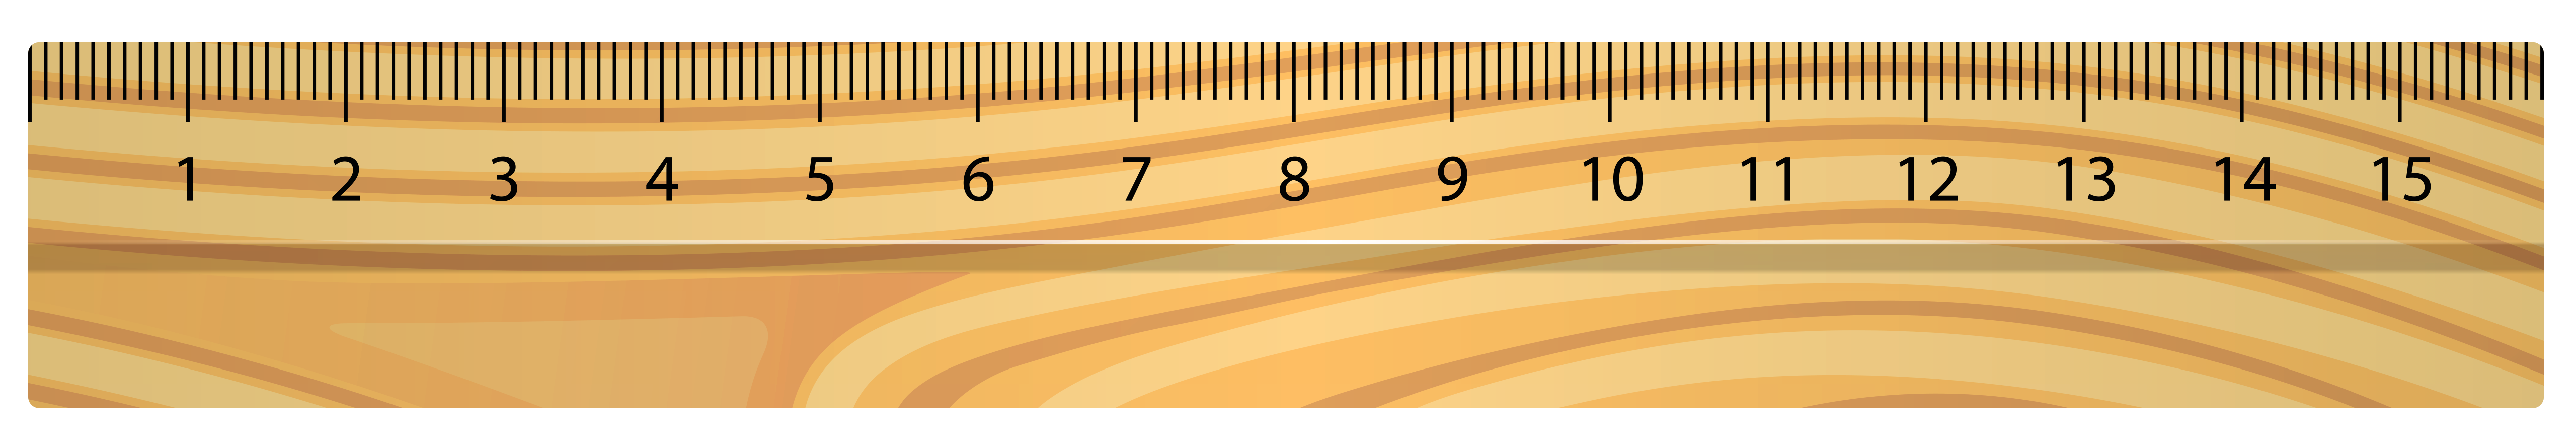 clipart pictures rulers - photo #38